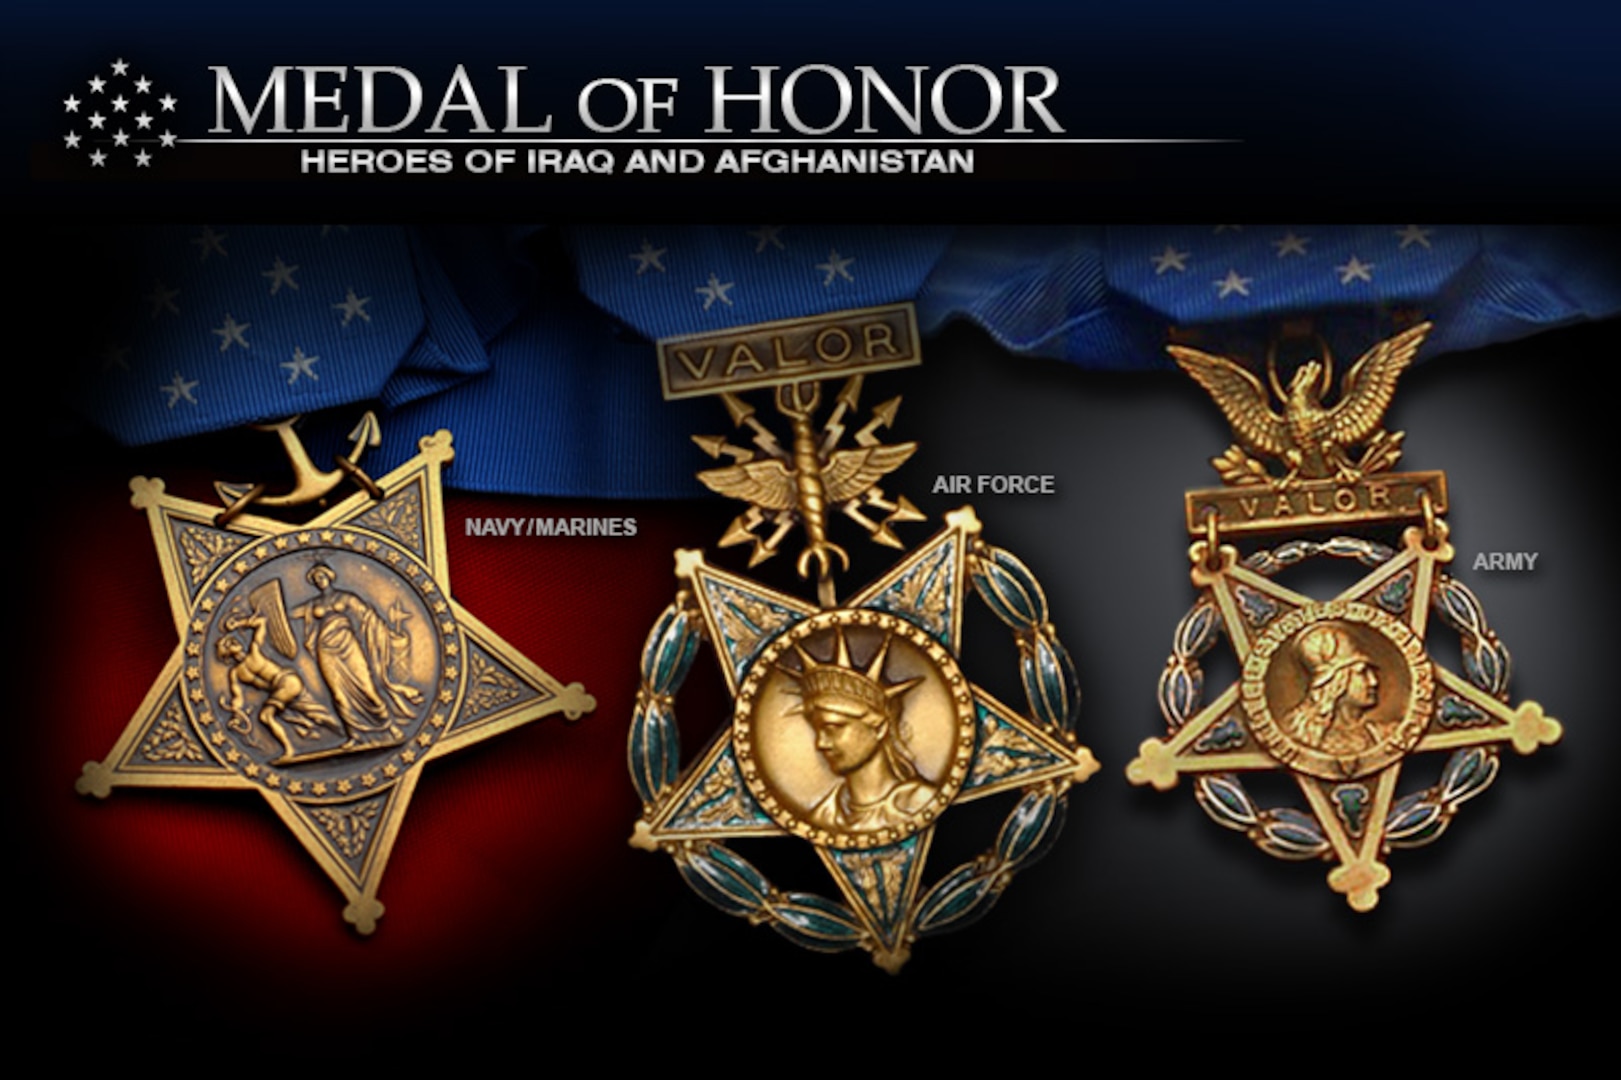 The Medal of Honor is the United States' highest military decoration. It has been bestowed on 3,488 men and one woman (a Civil War surgeon) since President Abraham Lincoln signed it into law on Dec. 21, 1861. It is reserved for those who are distinguished "conspicuously by gallantry and intrepidity at the risk of his life above and beyond the call of duty while engaged in an action against an enemy of the United States."